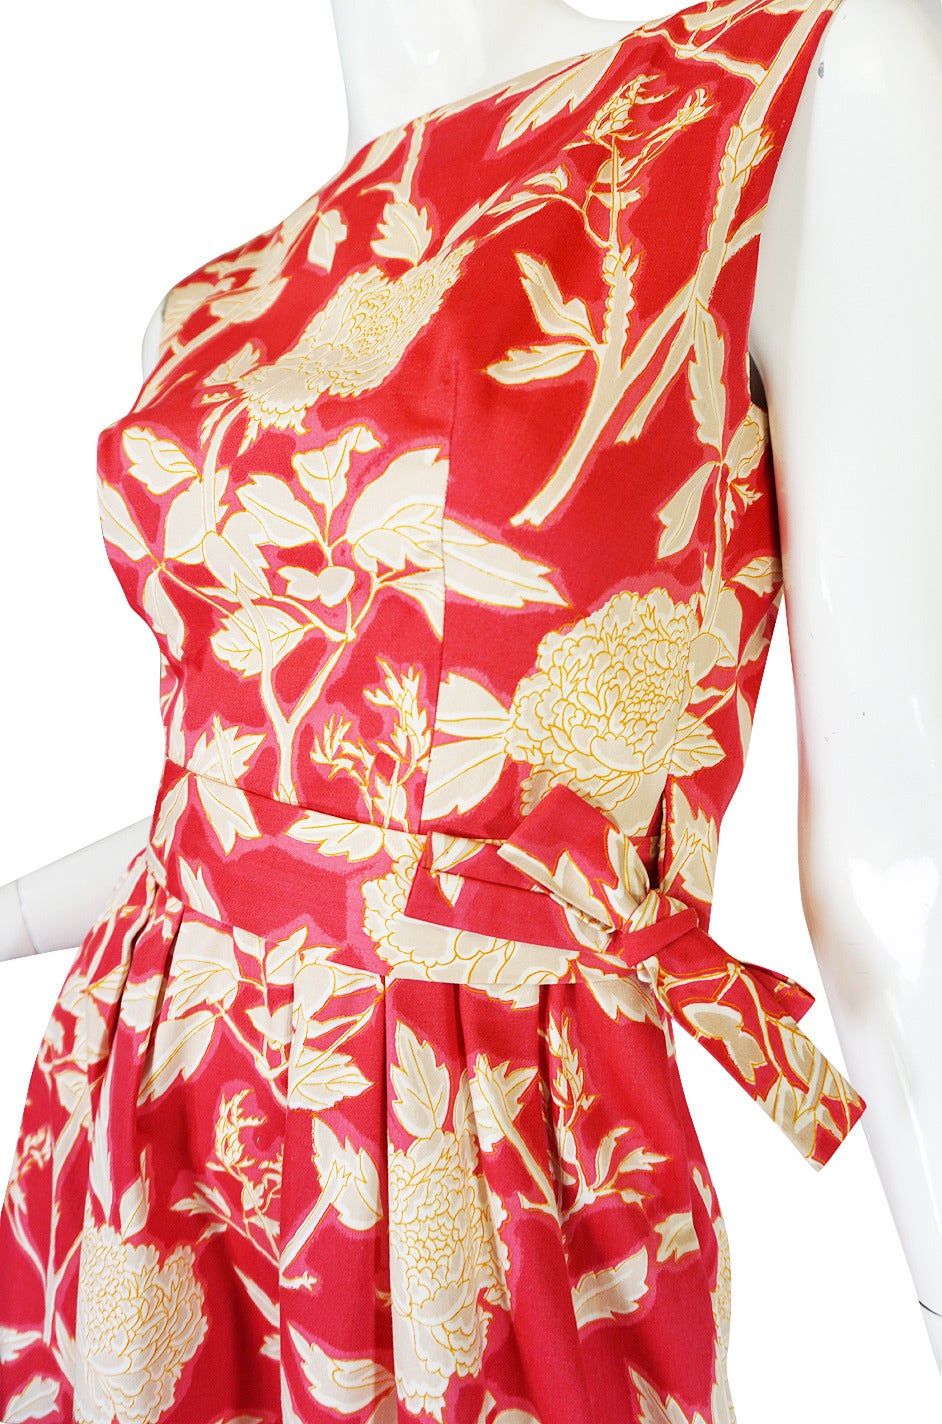 Early 1960s Floral Print Christian Dior New York Dress at 1stDibs